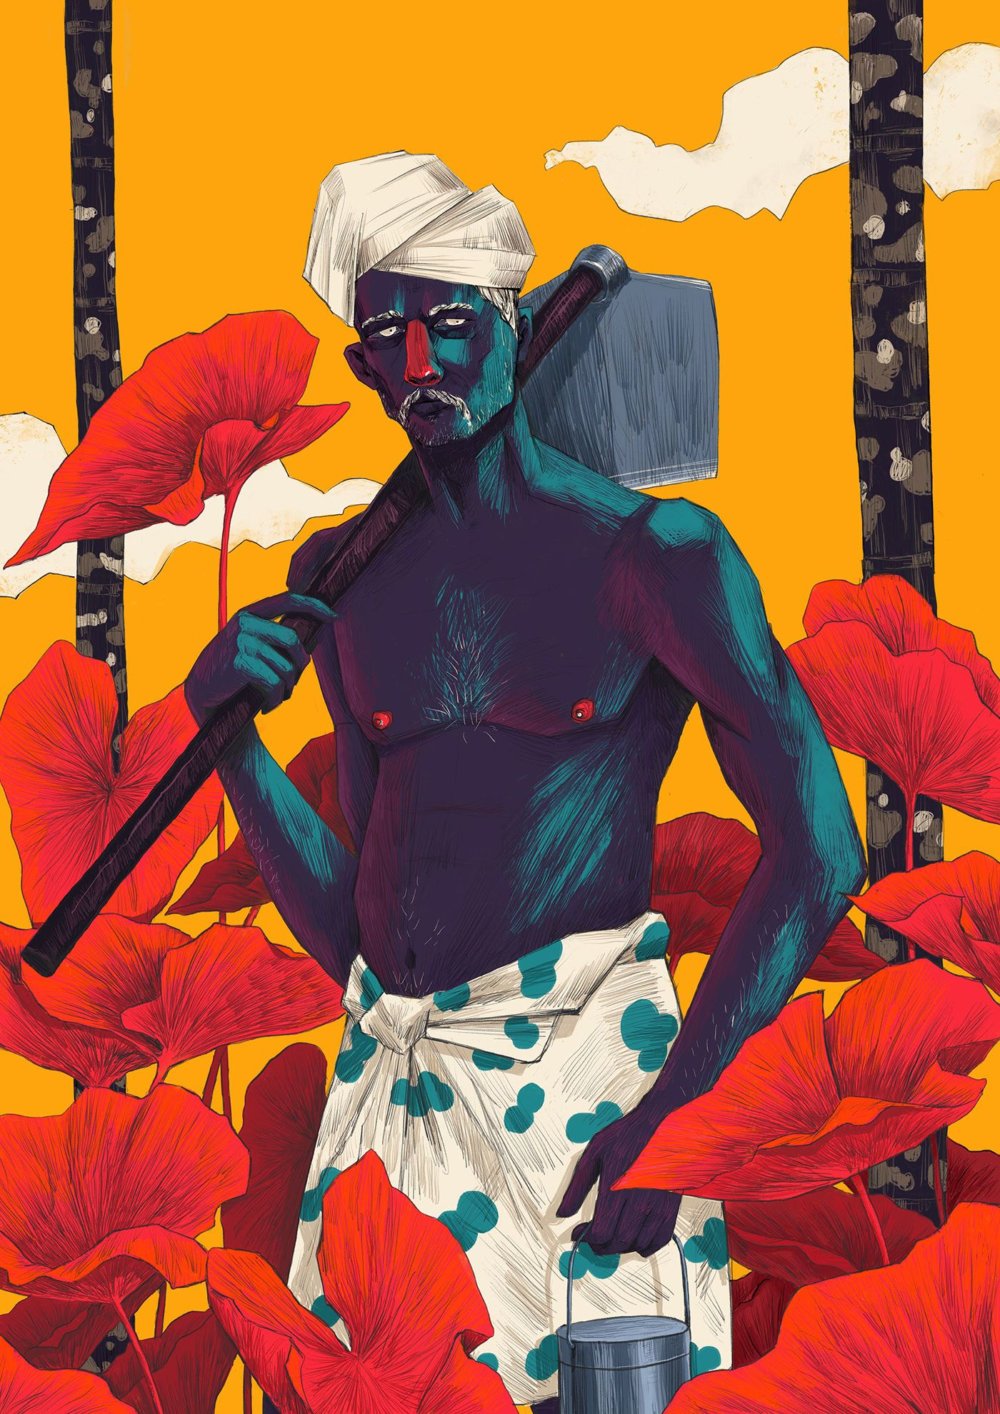 The Beauty Of Indian Culture In Illustrations By Muhammed Sajid 5